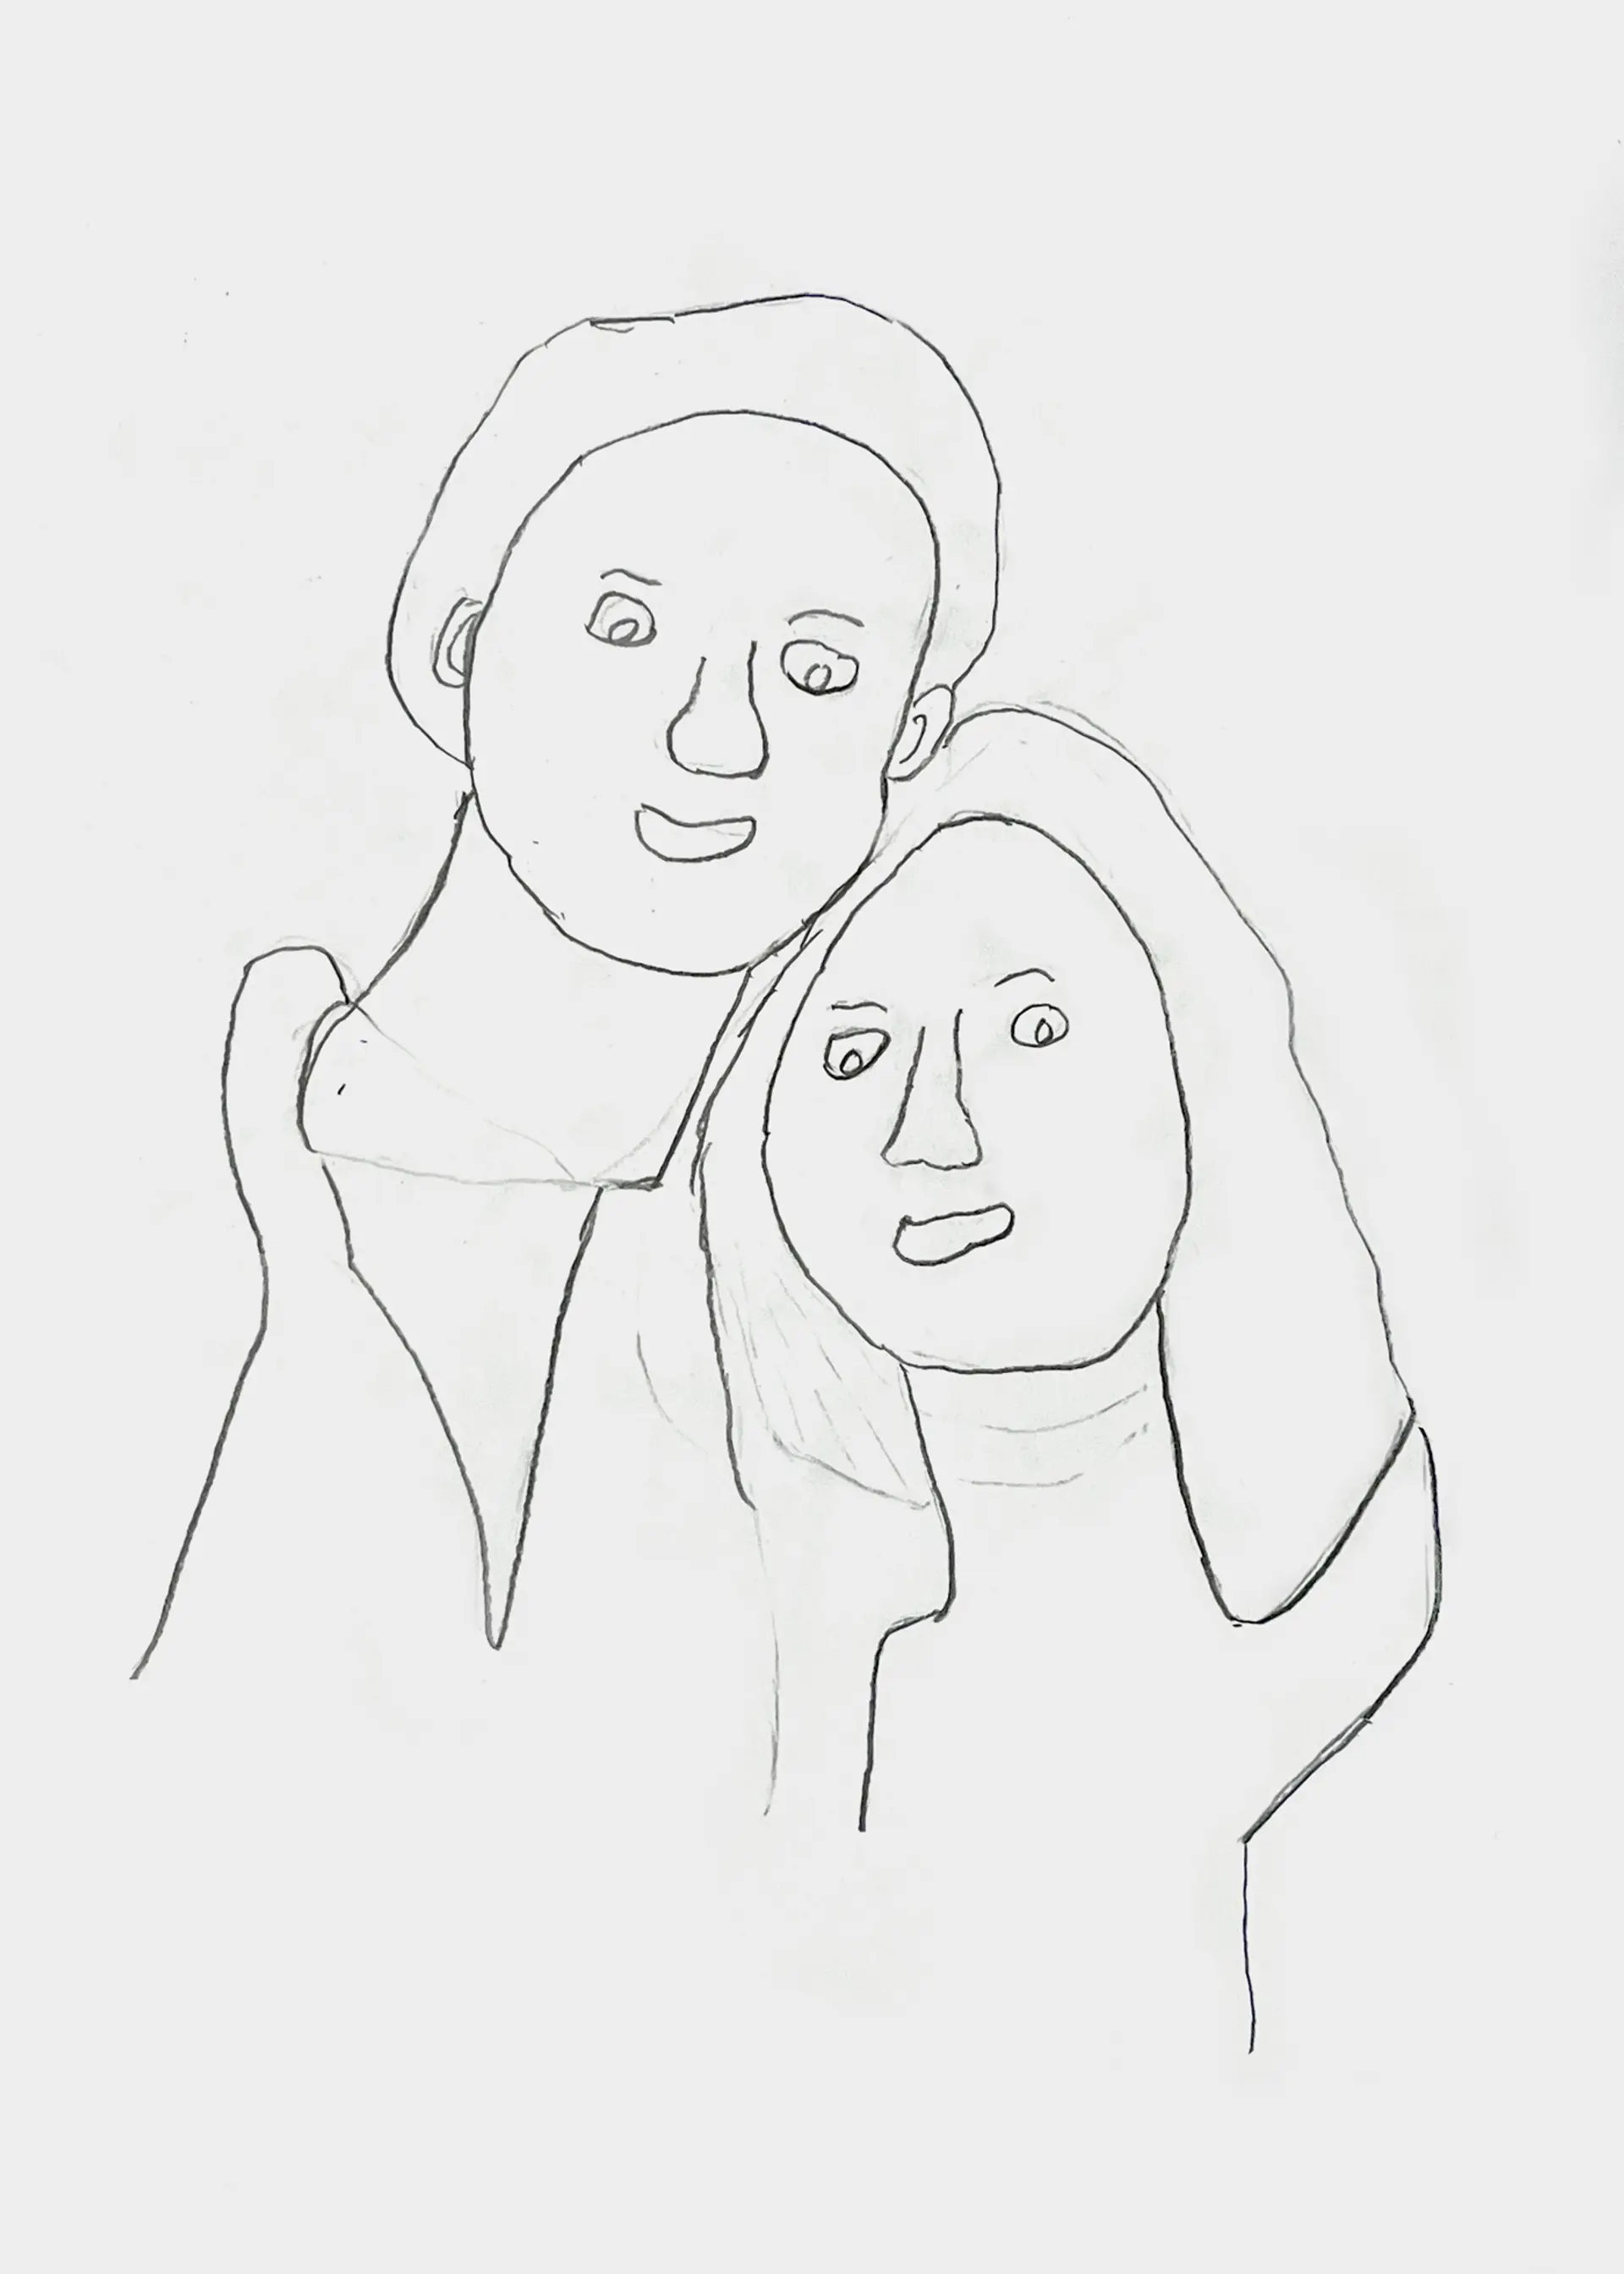 A line drawing of a couple, Ena’s sister and brother-in-law. Their heads are close together and they are smiling at the viewer.